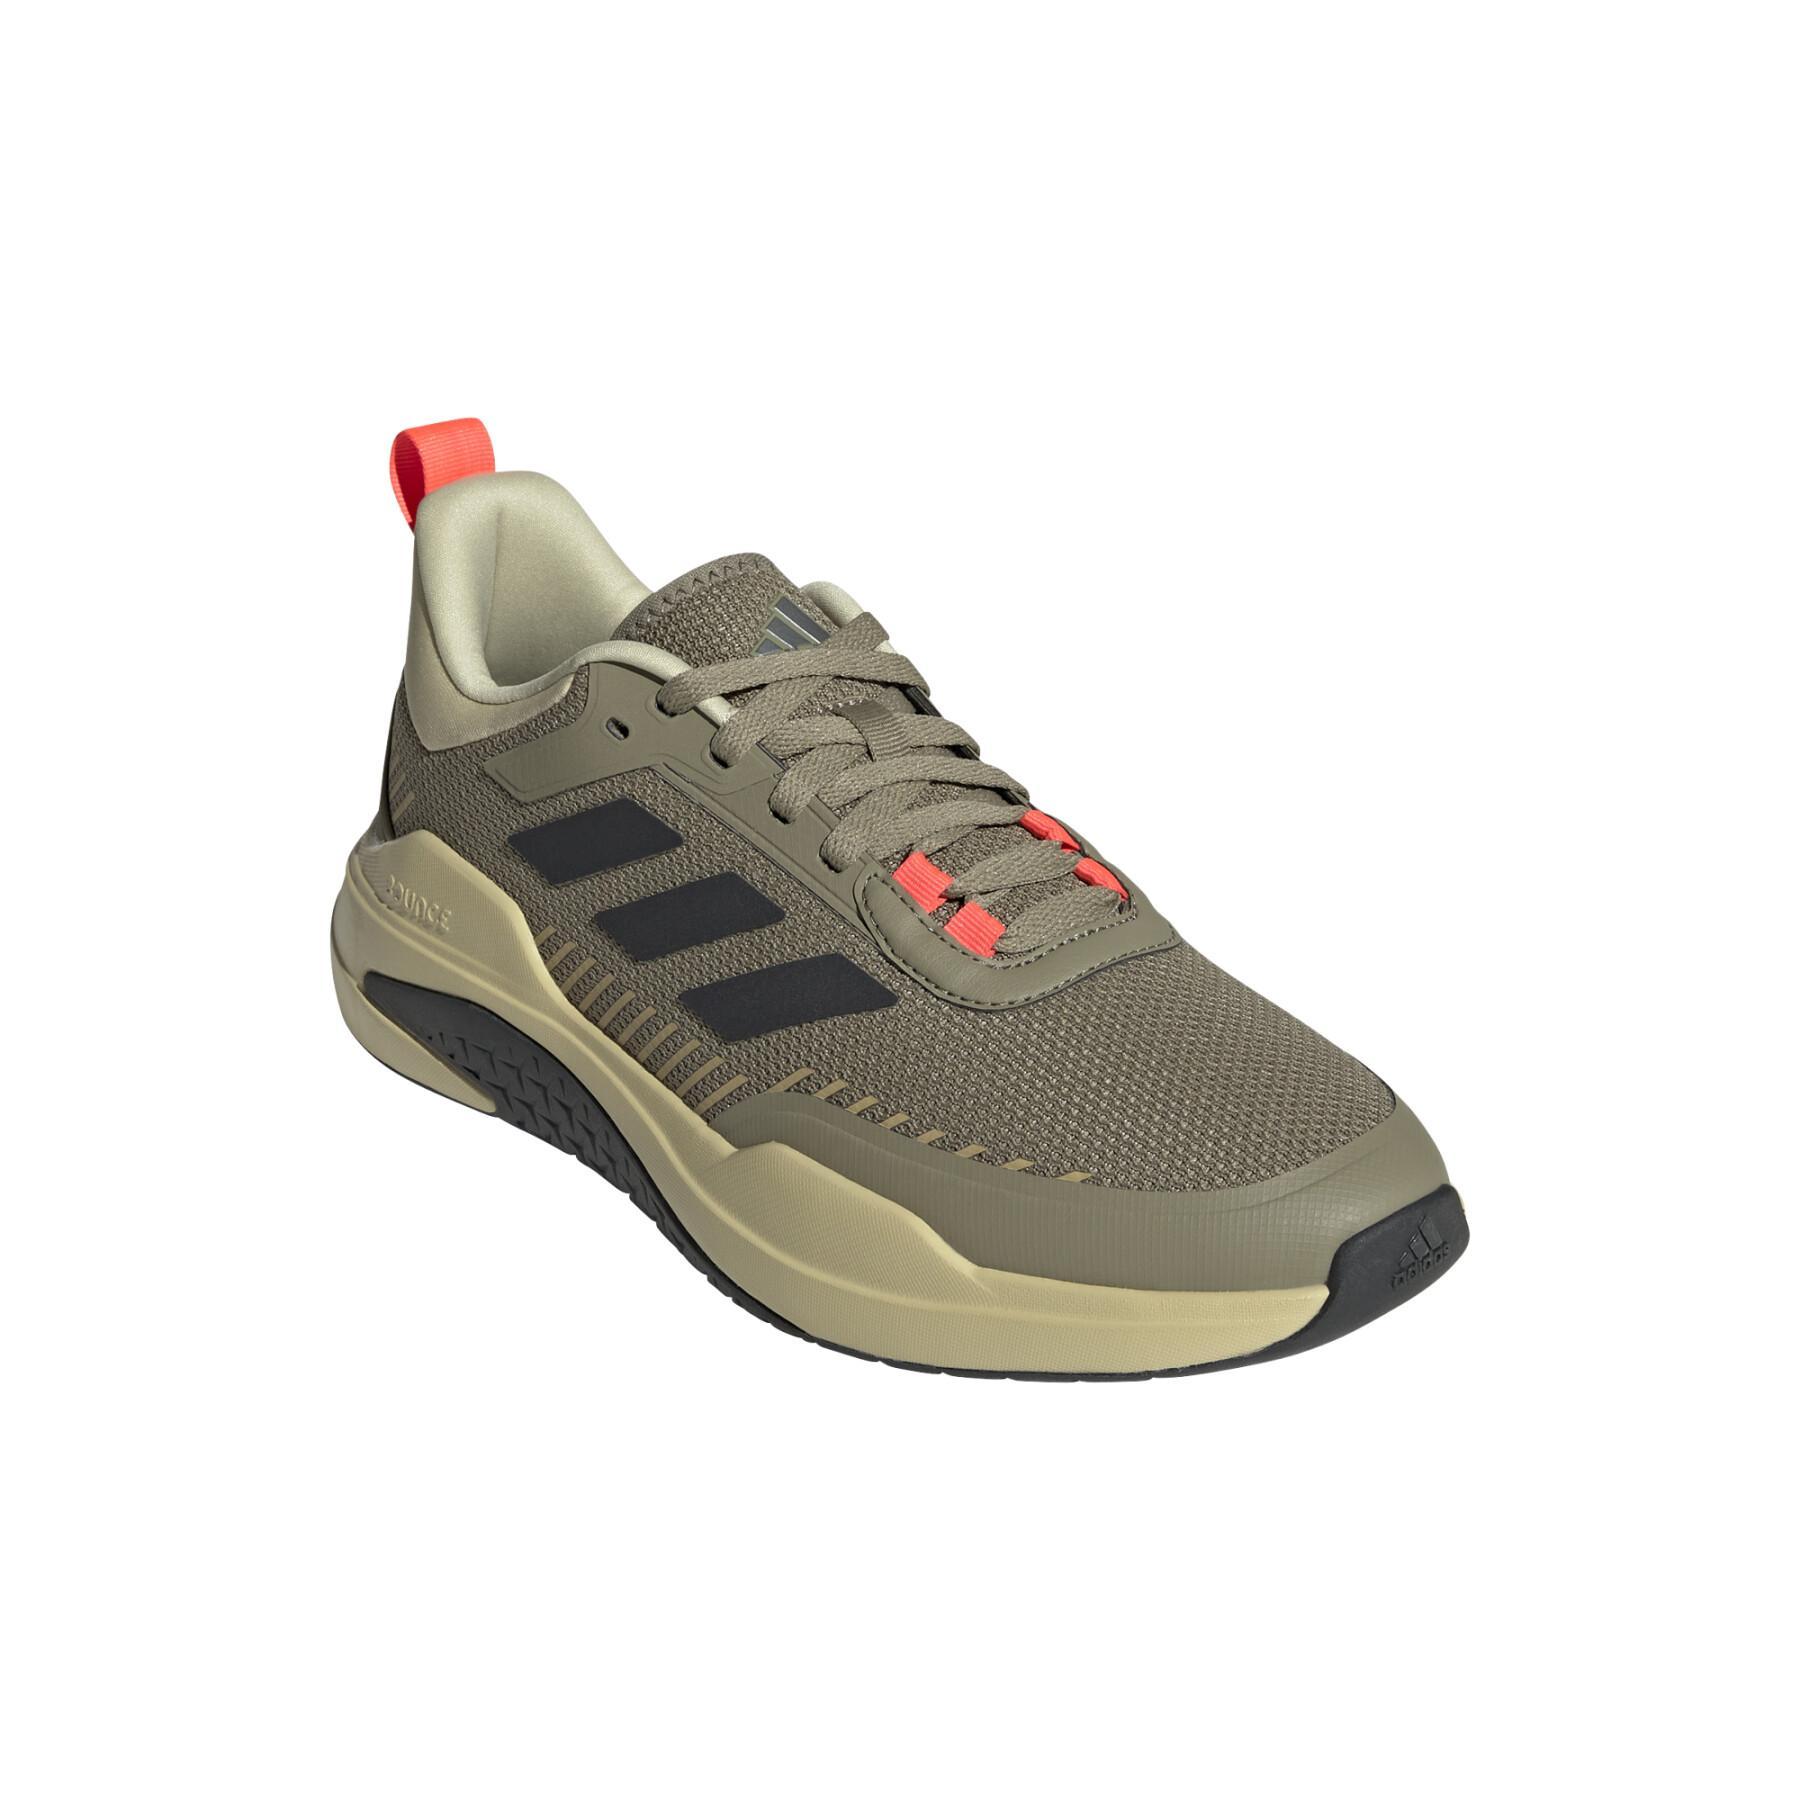 Chaussures adidas Trainer V